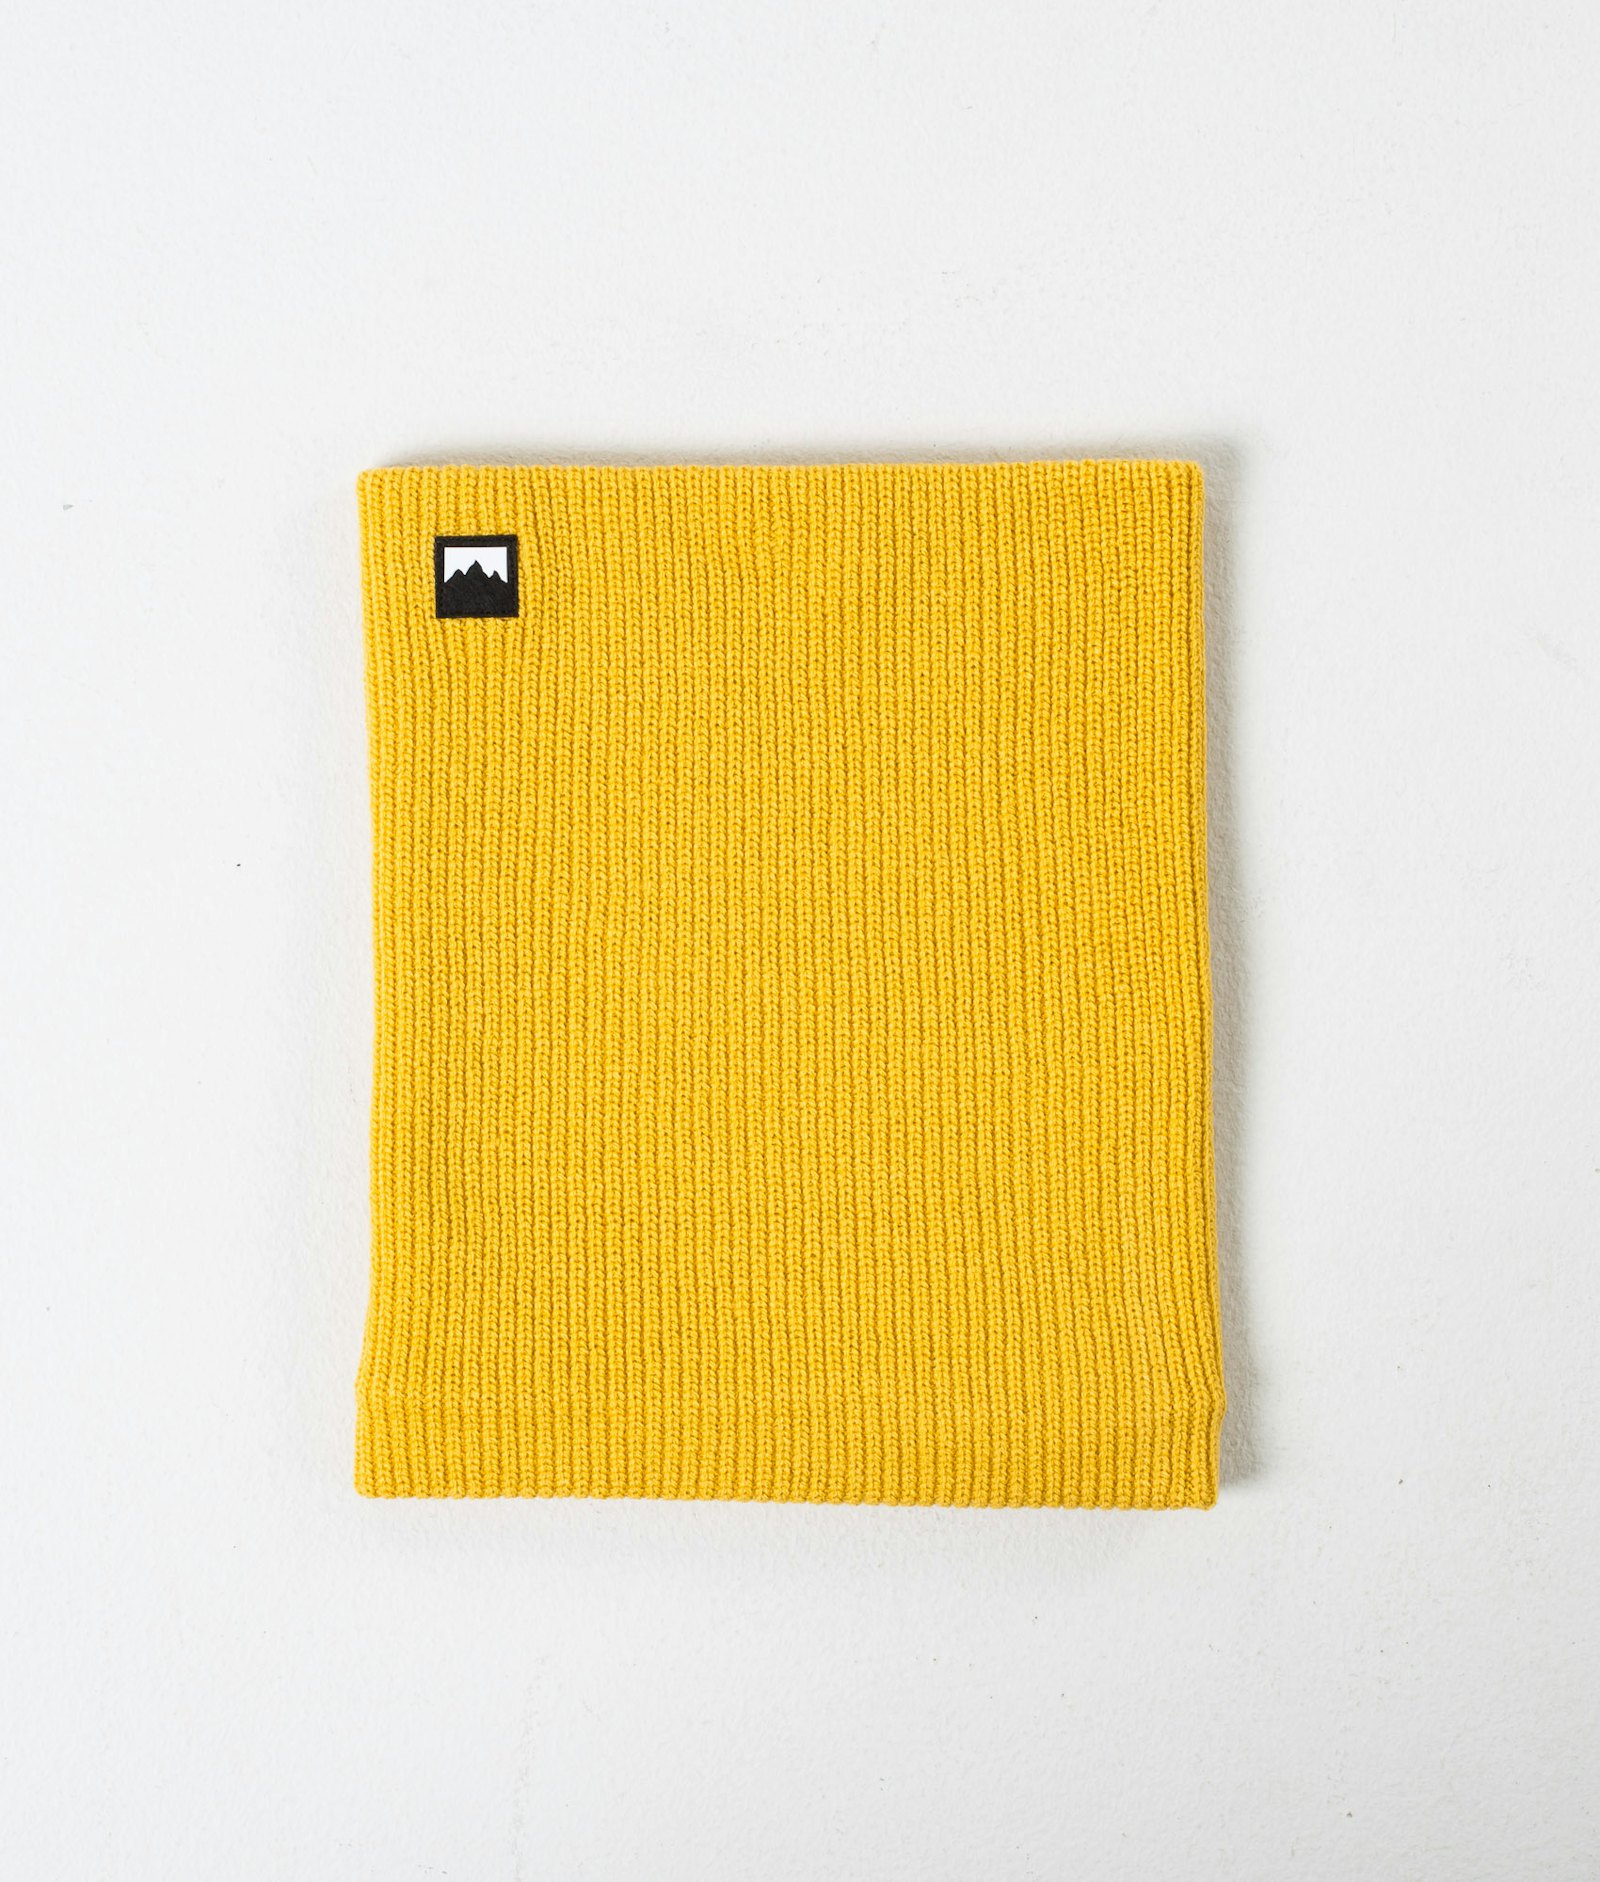 Montec Classic Knitted 2020 Facemask Yellow, Image 3 of 4